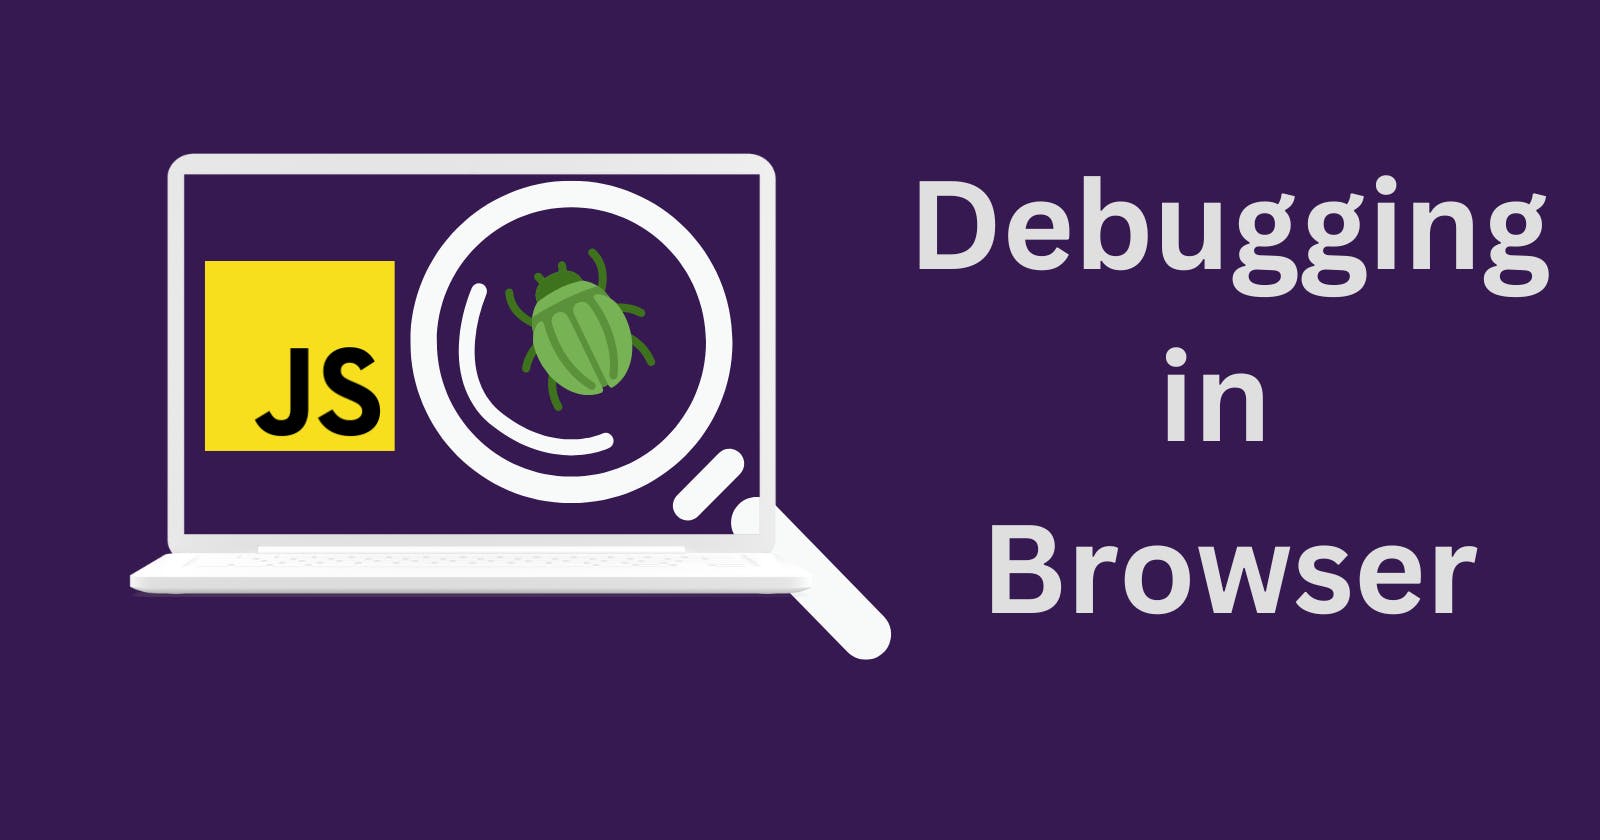 Debugging in the Browser